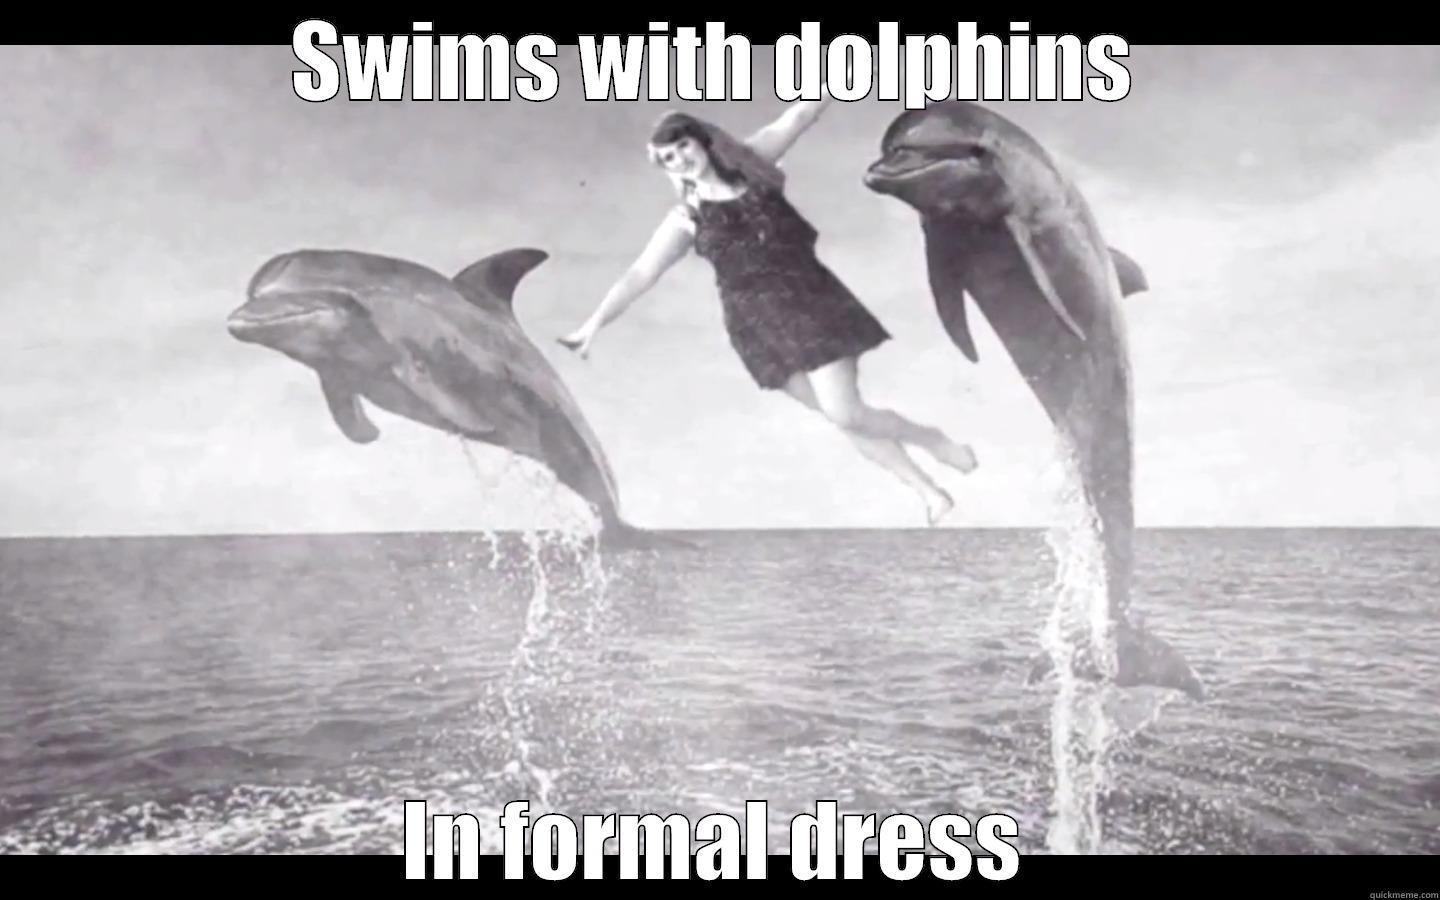 swims with dolphins - SWIMS WITH DOLPHINS IN FORMAL DRESS Misc